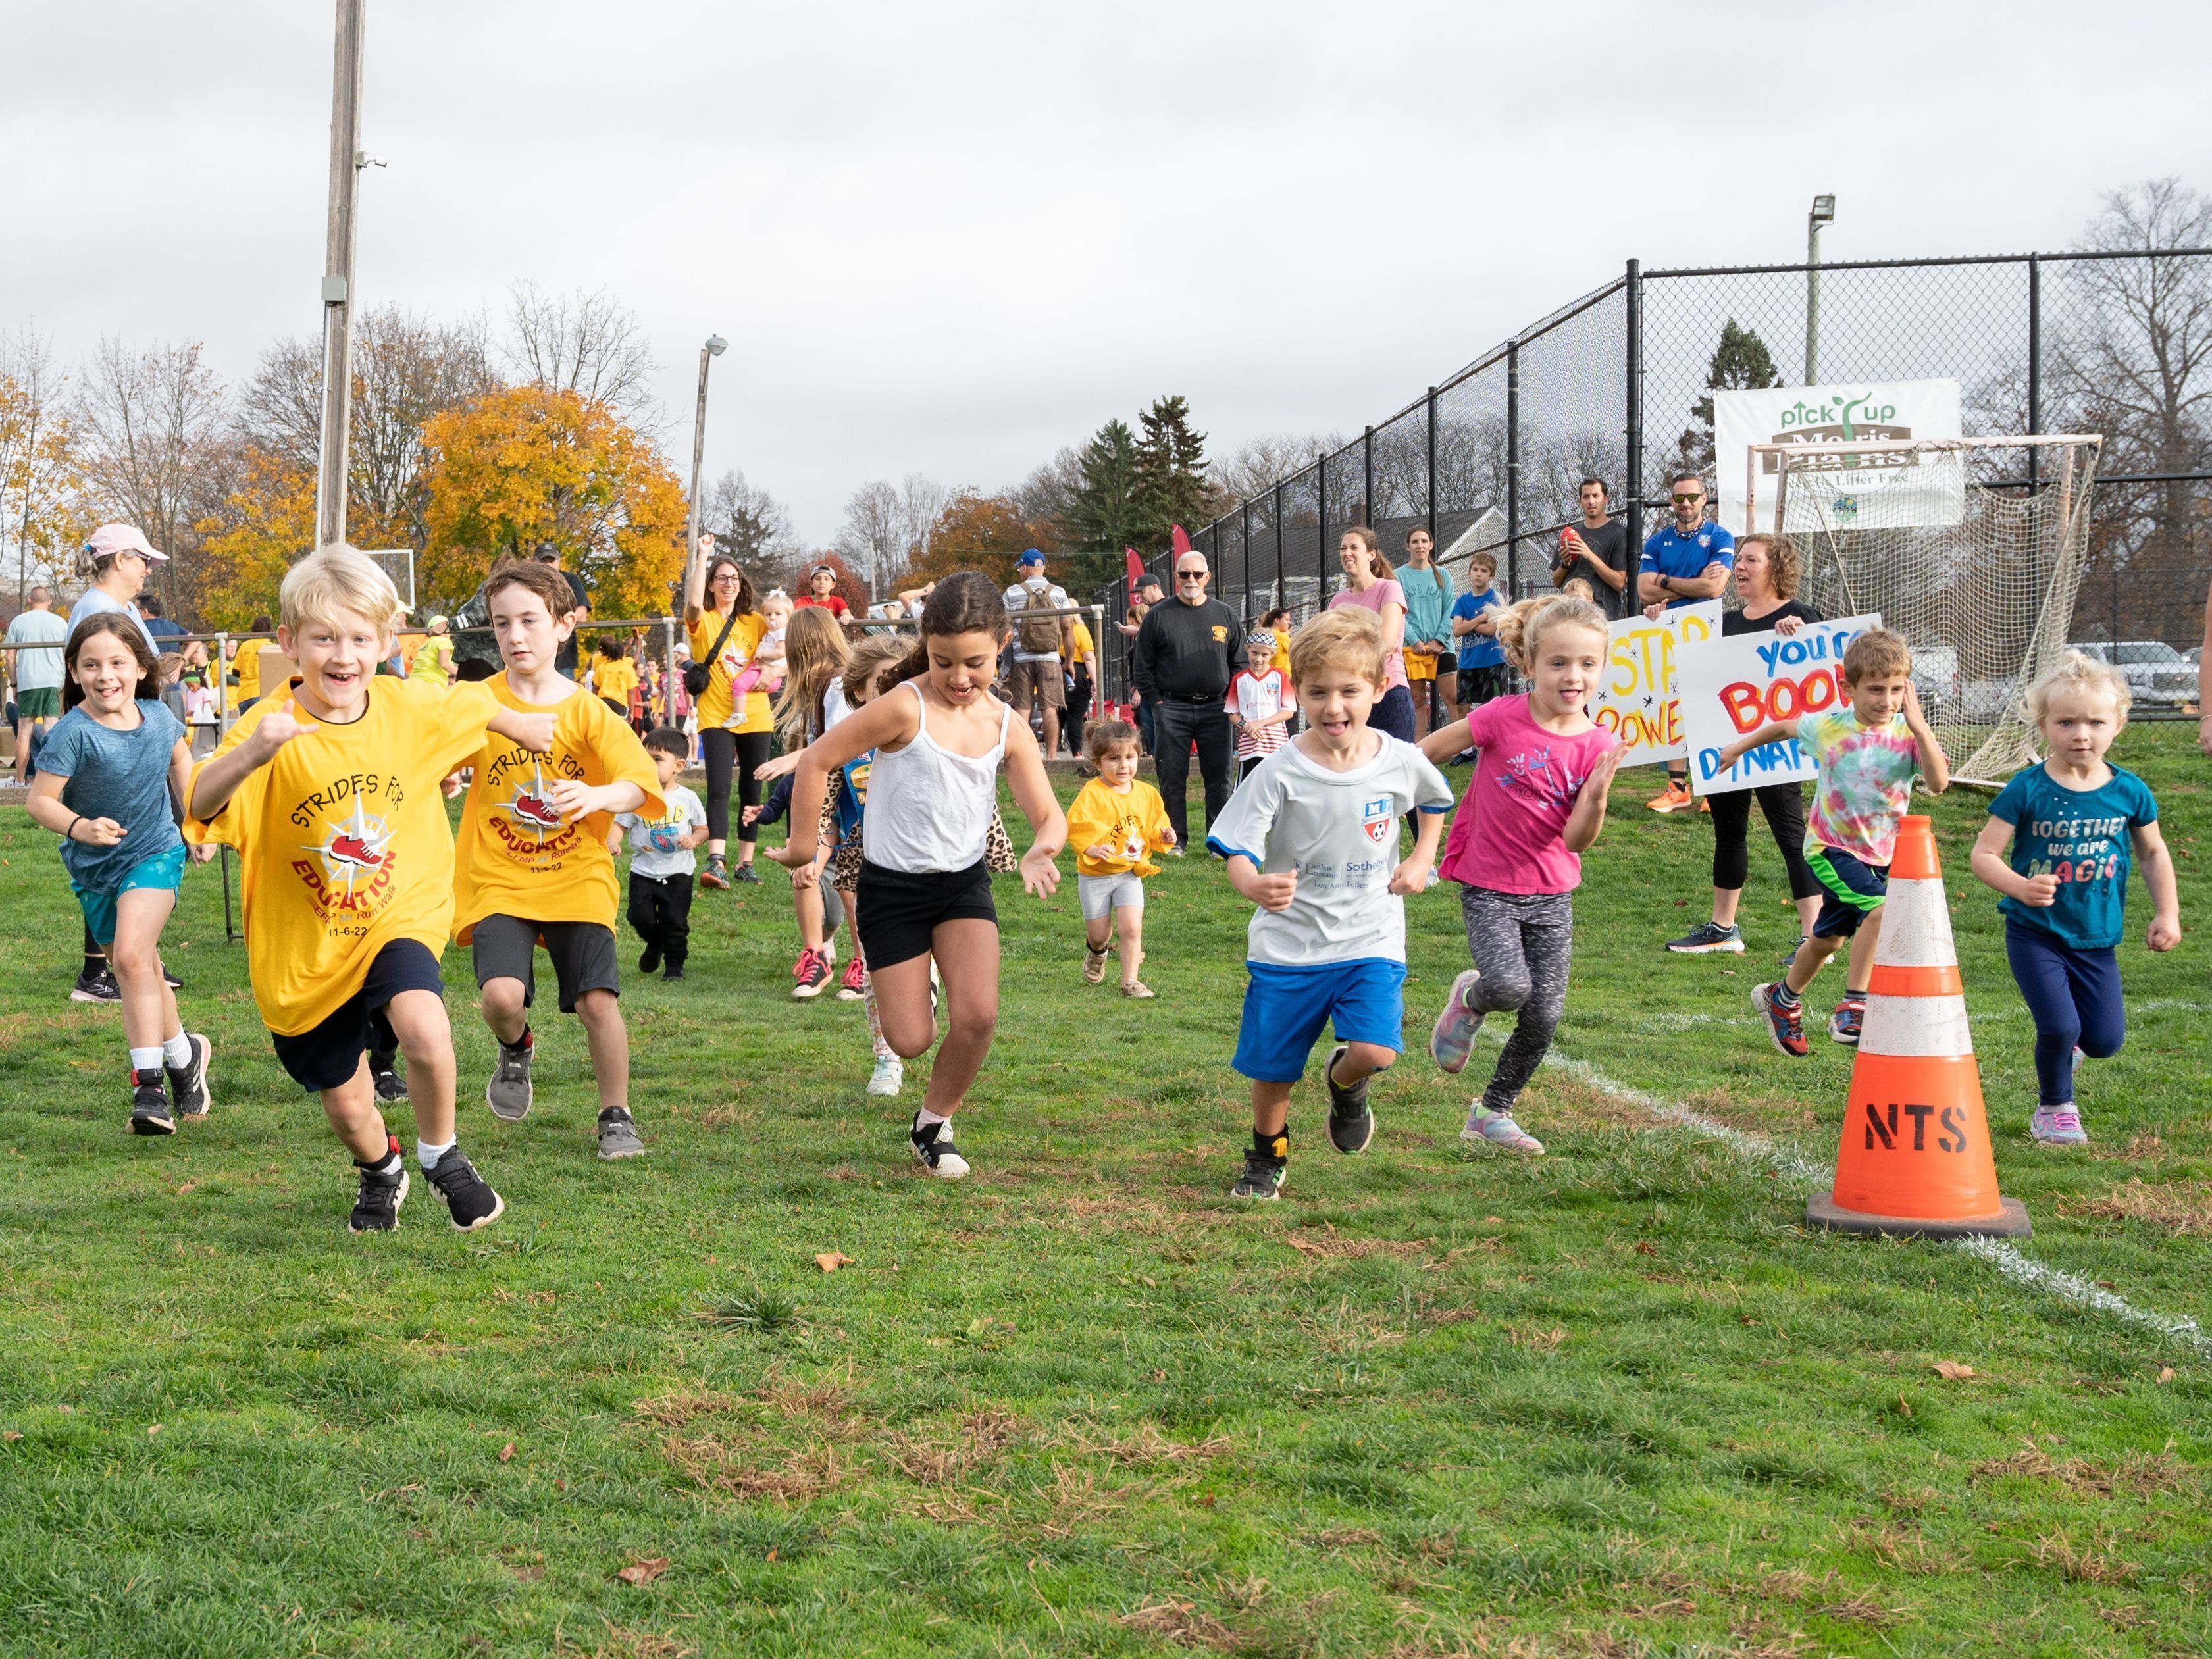 Kids' Fun Run at the Strides for Education 5K in Morris Plains